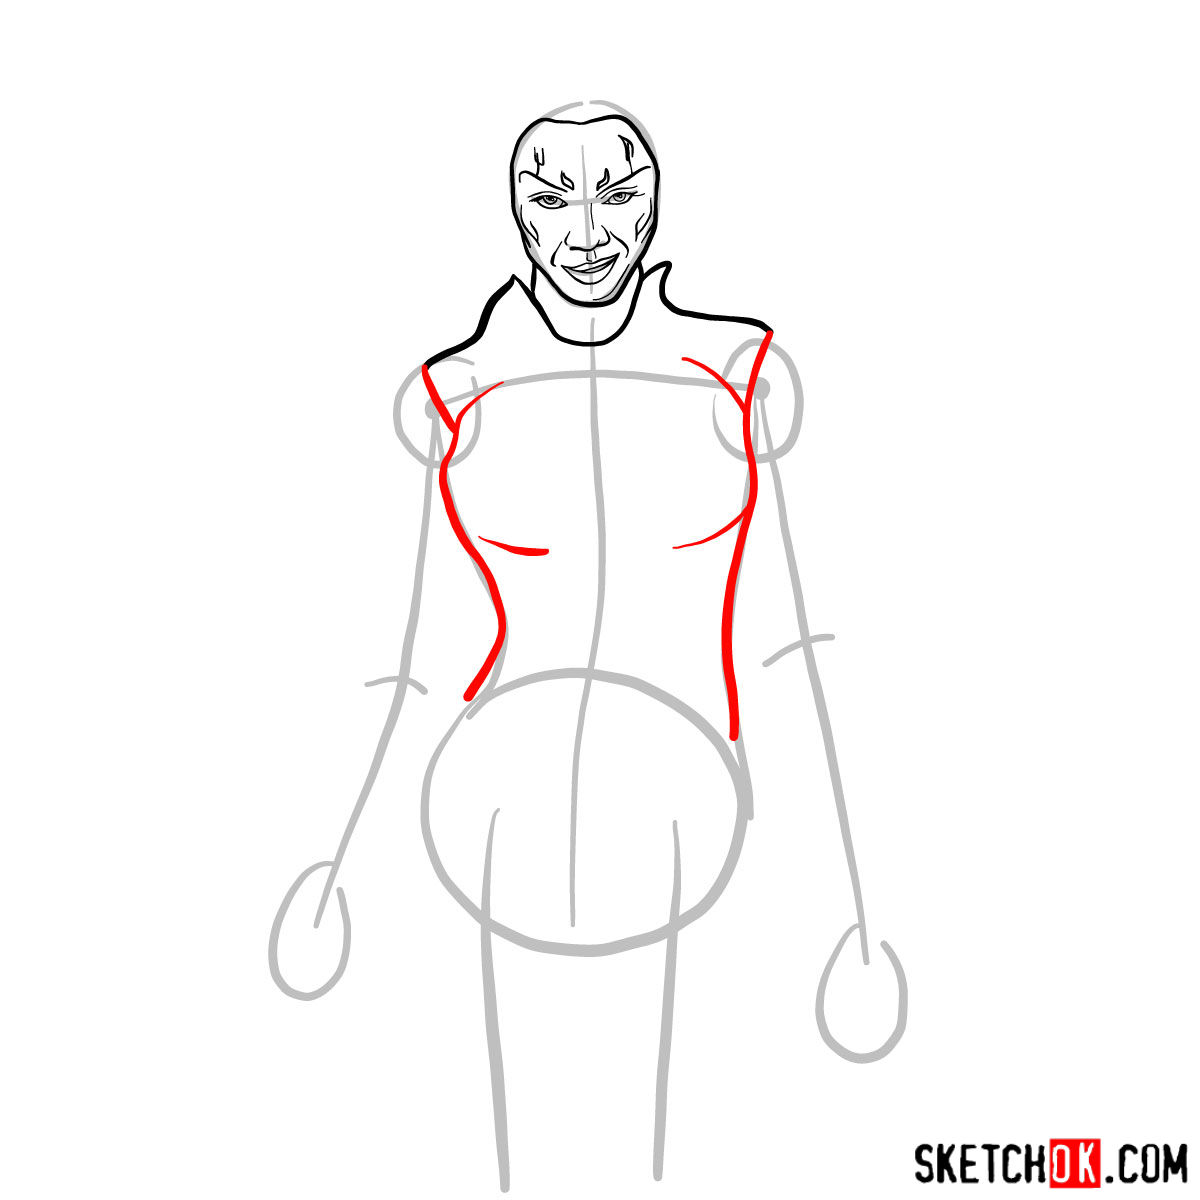 How to draw Gamora from Guardians of the Galaxy - step 06